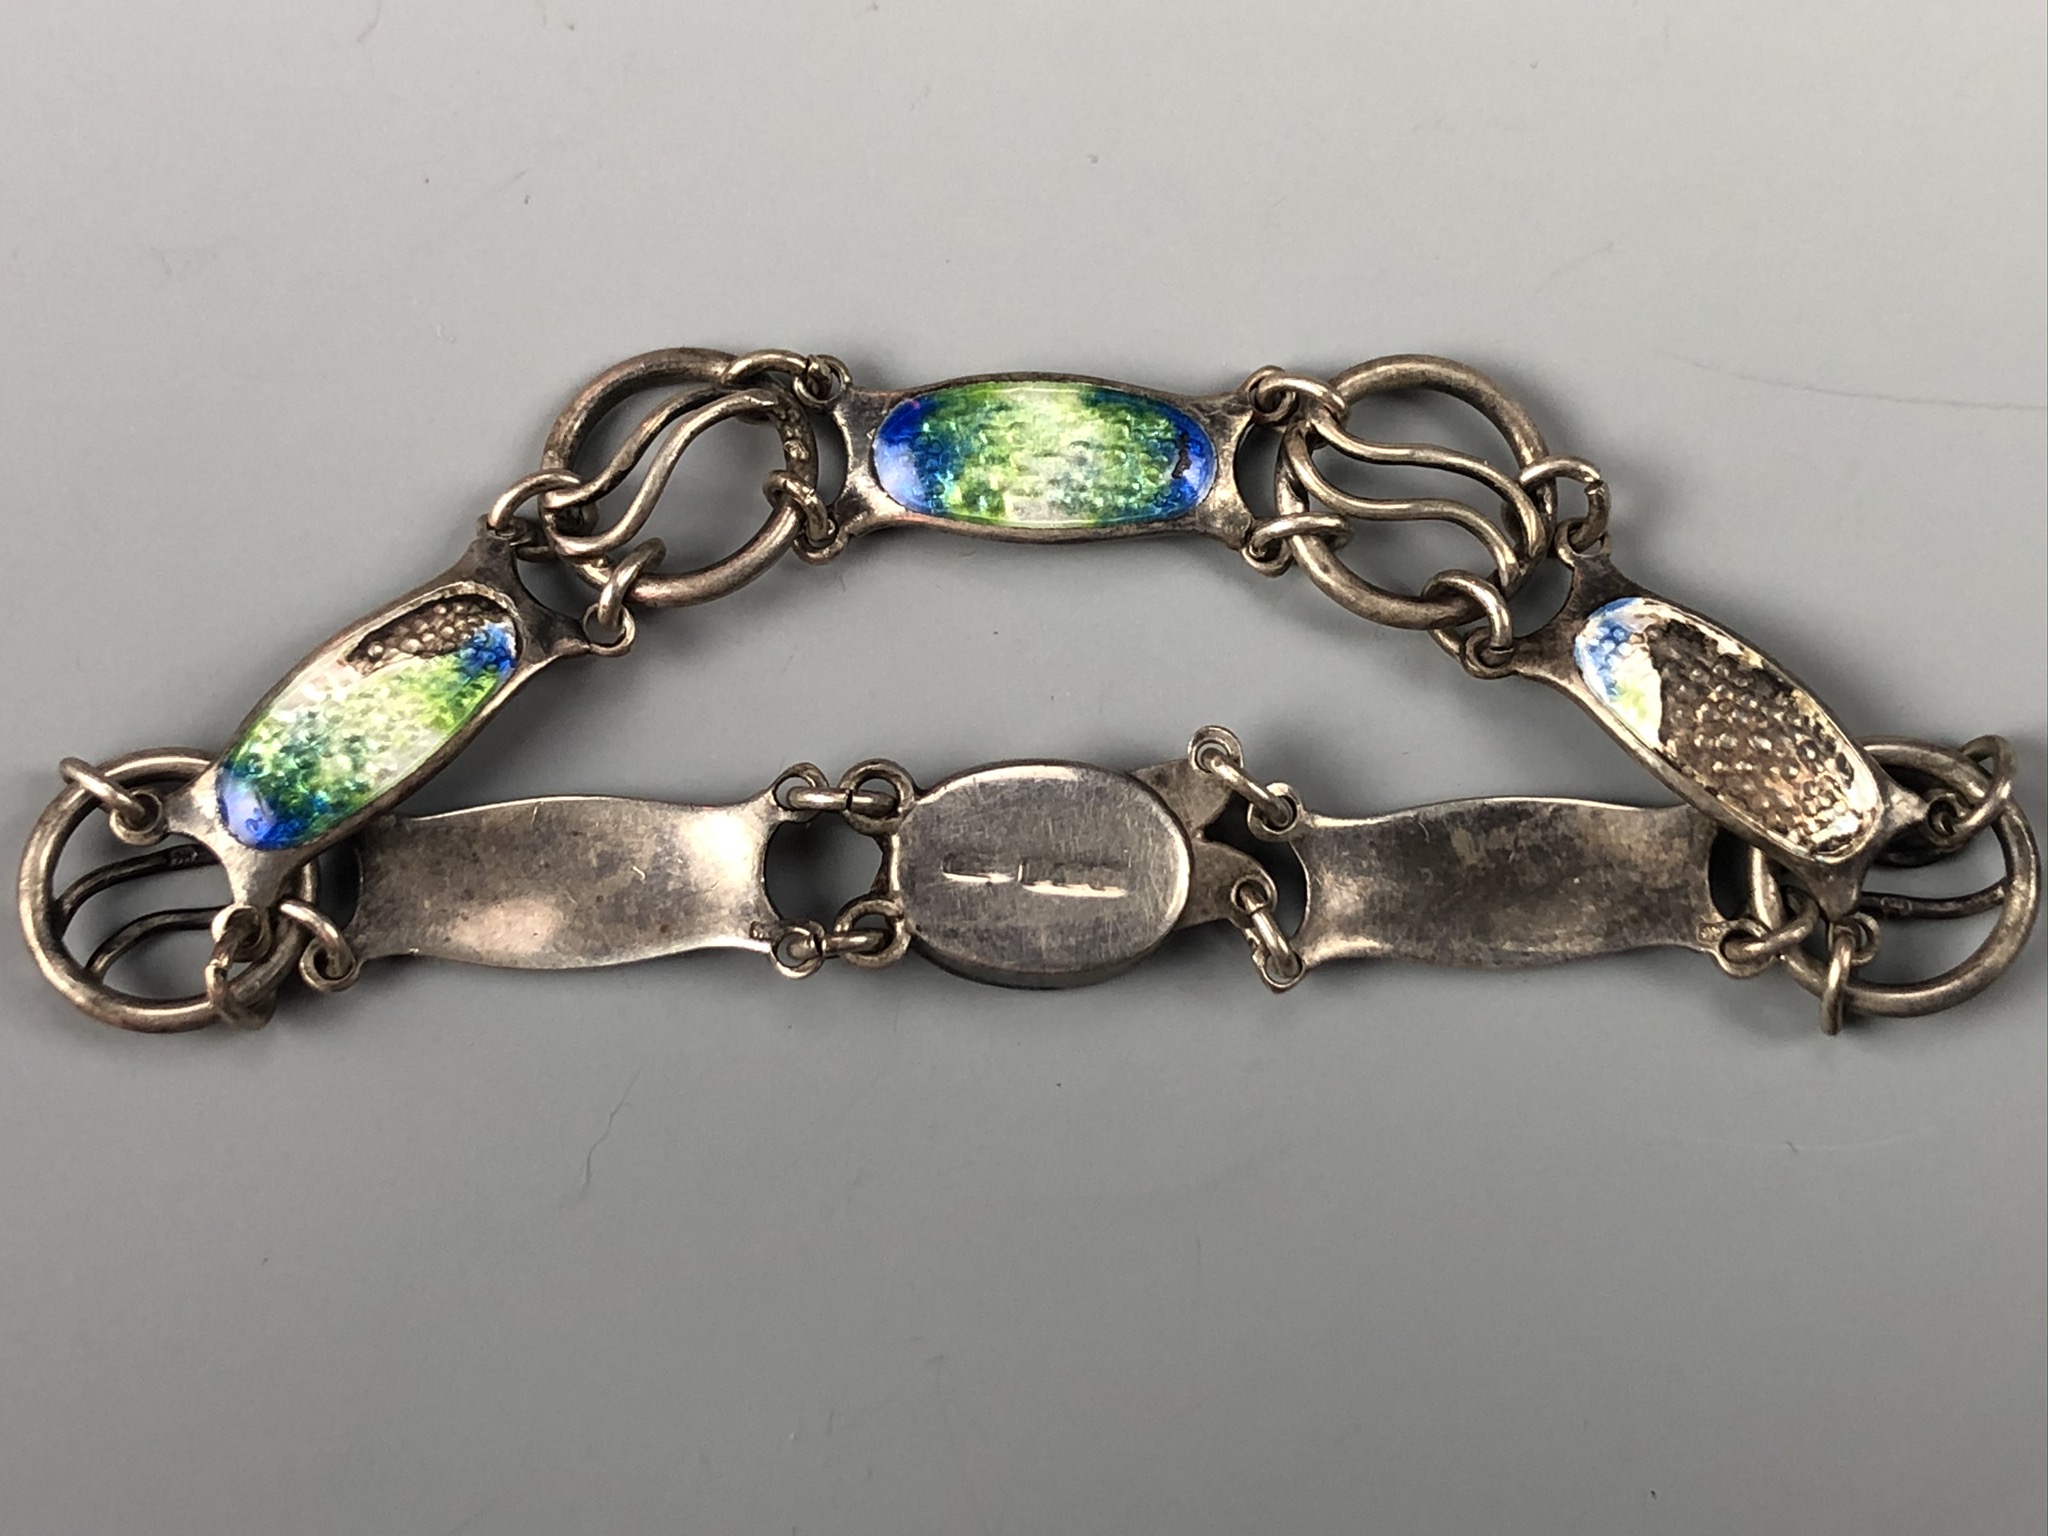 An antique Arts and Crafts influenced basse-taille enamelled silver bracelet, having organic plaques